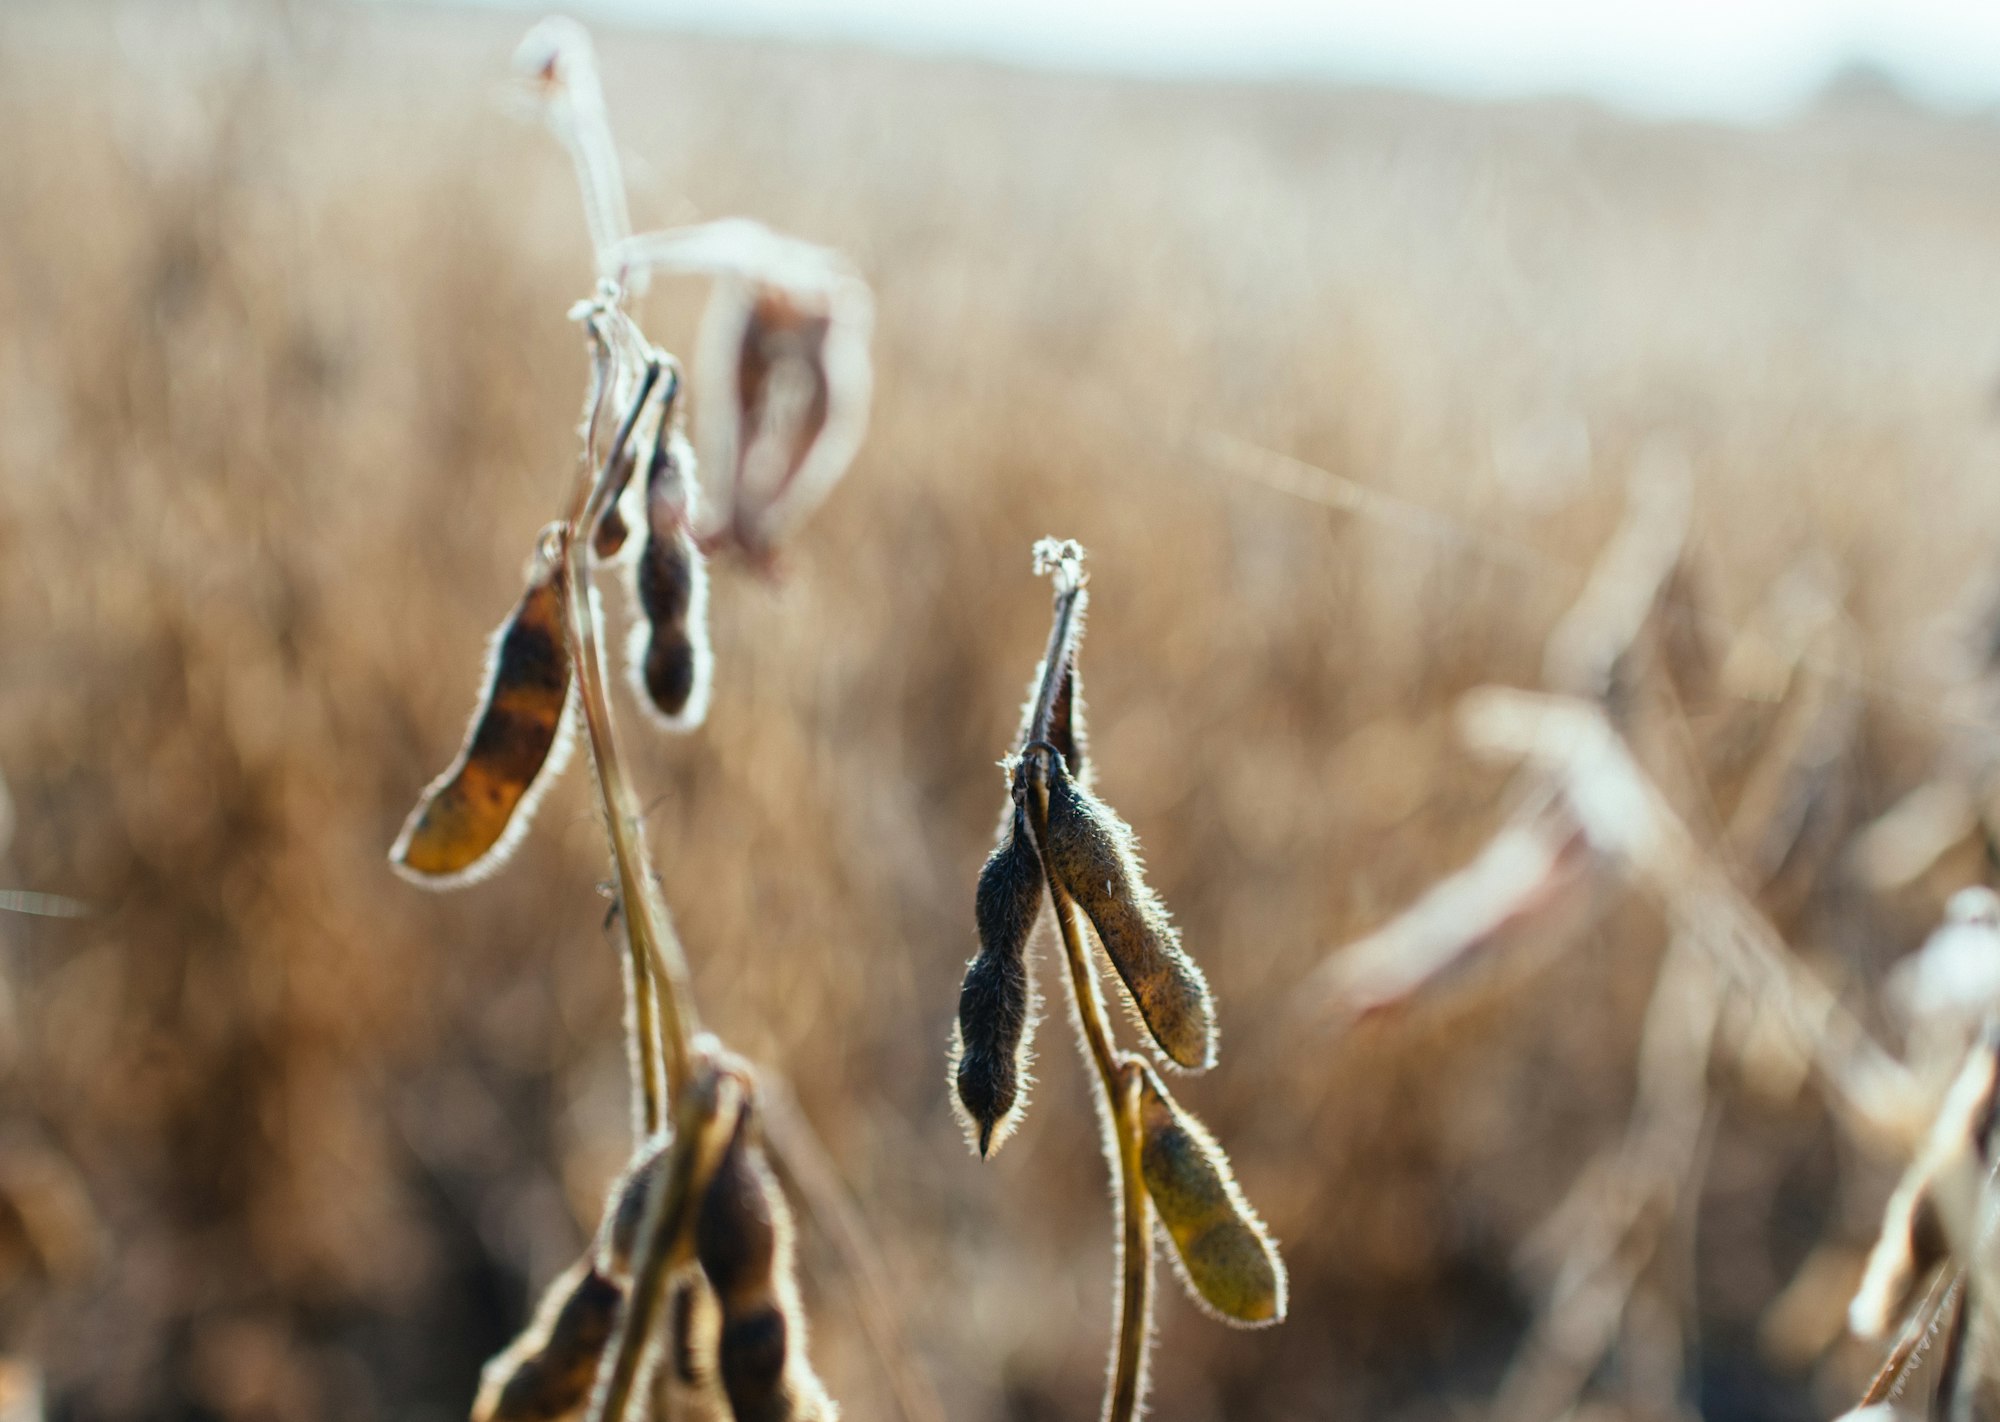 Soybeans and the 61.8% effect